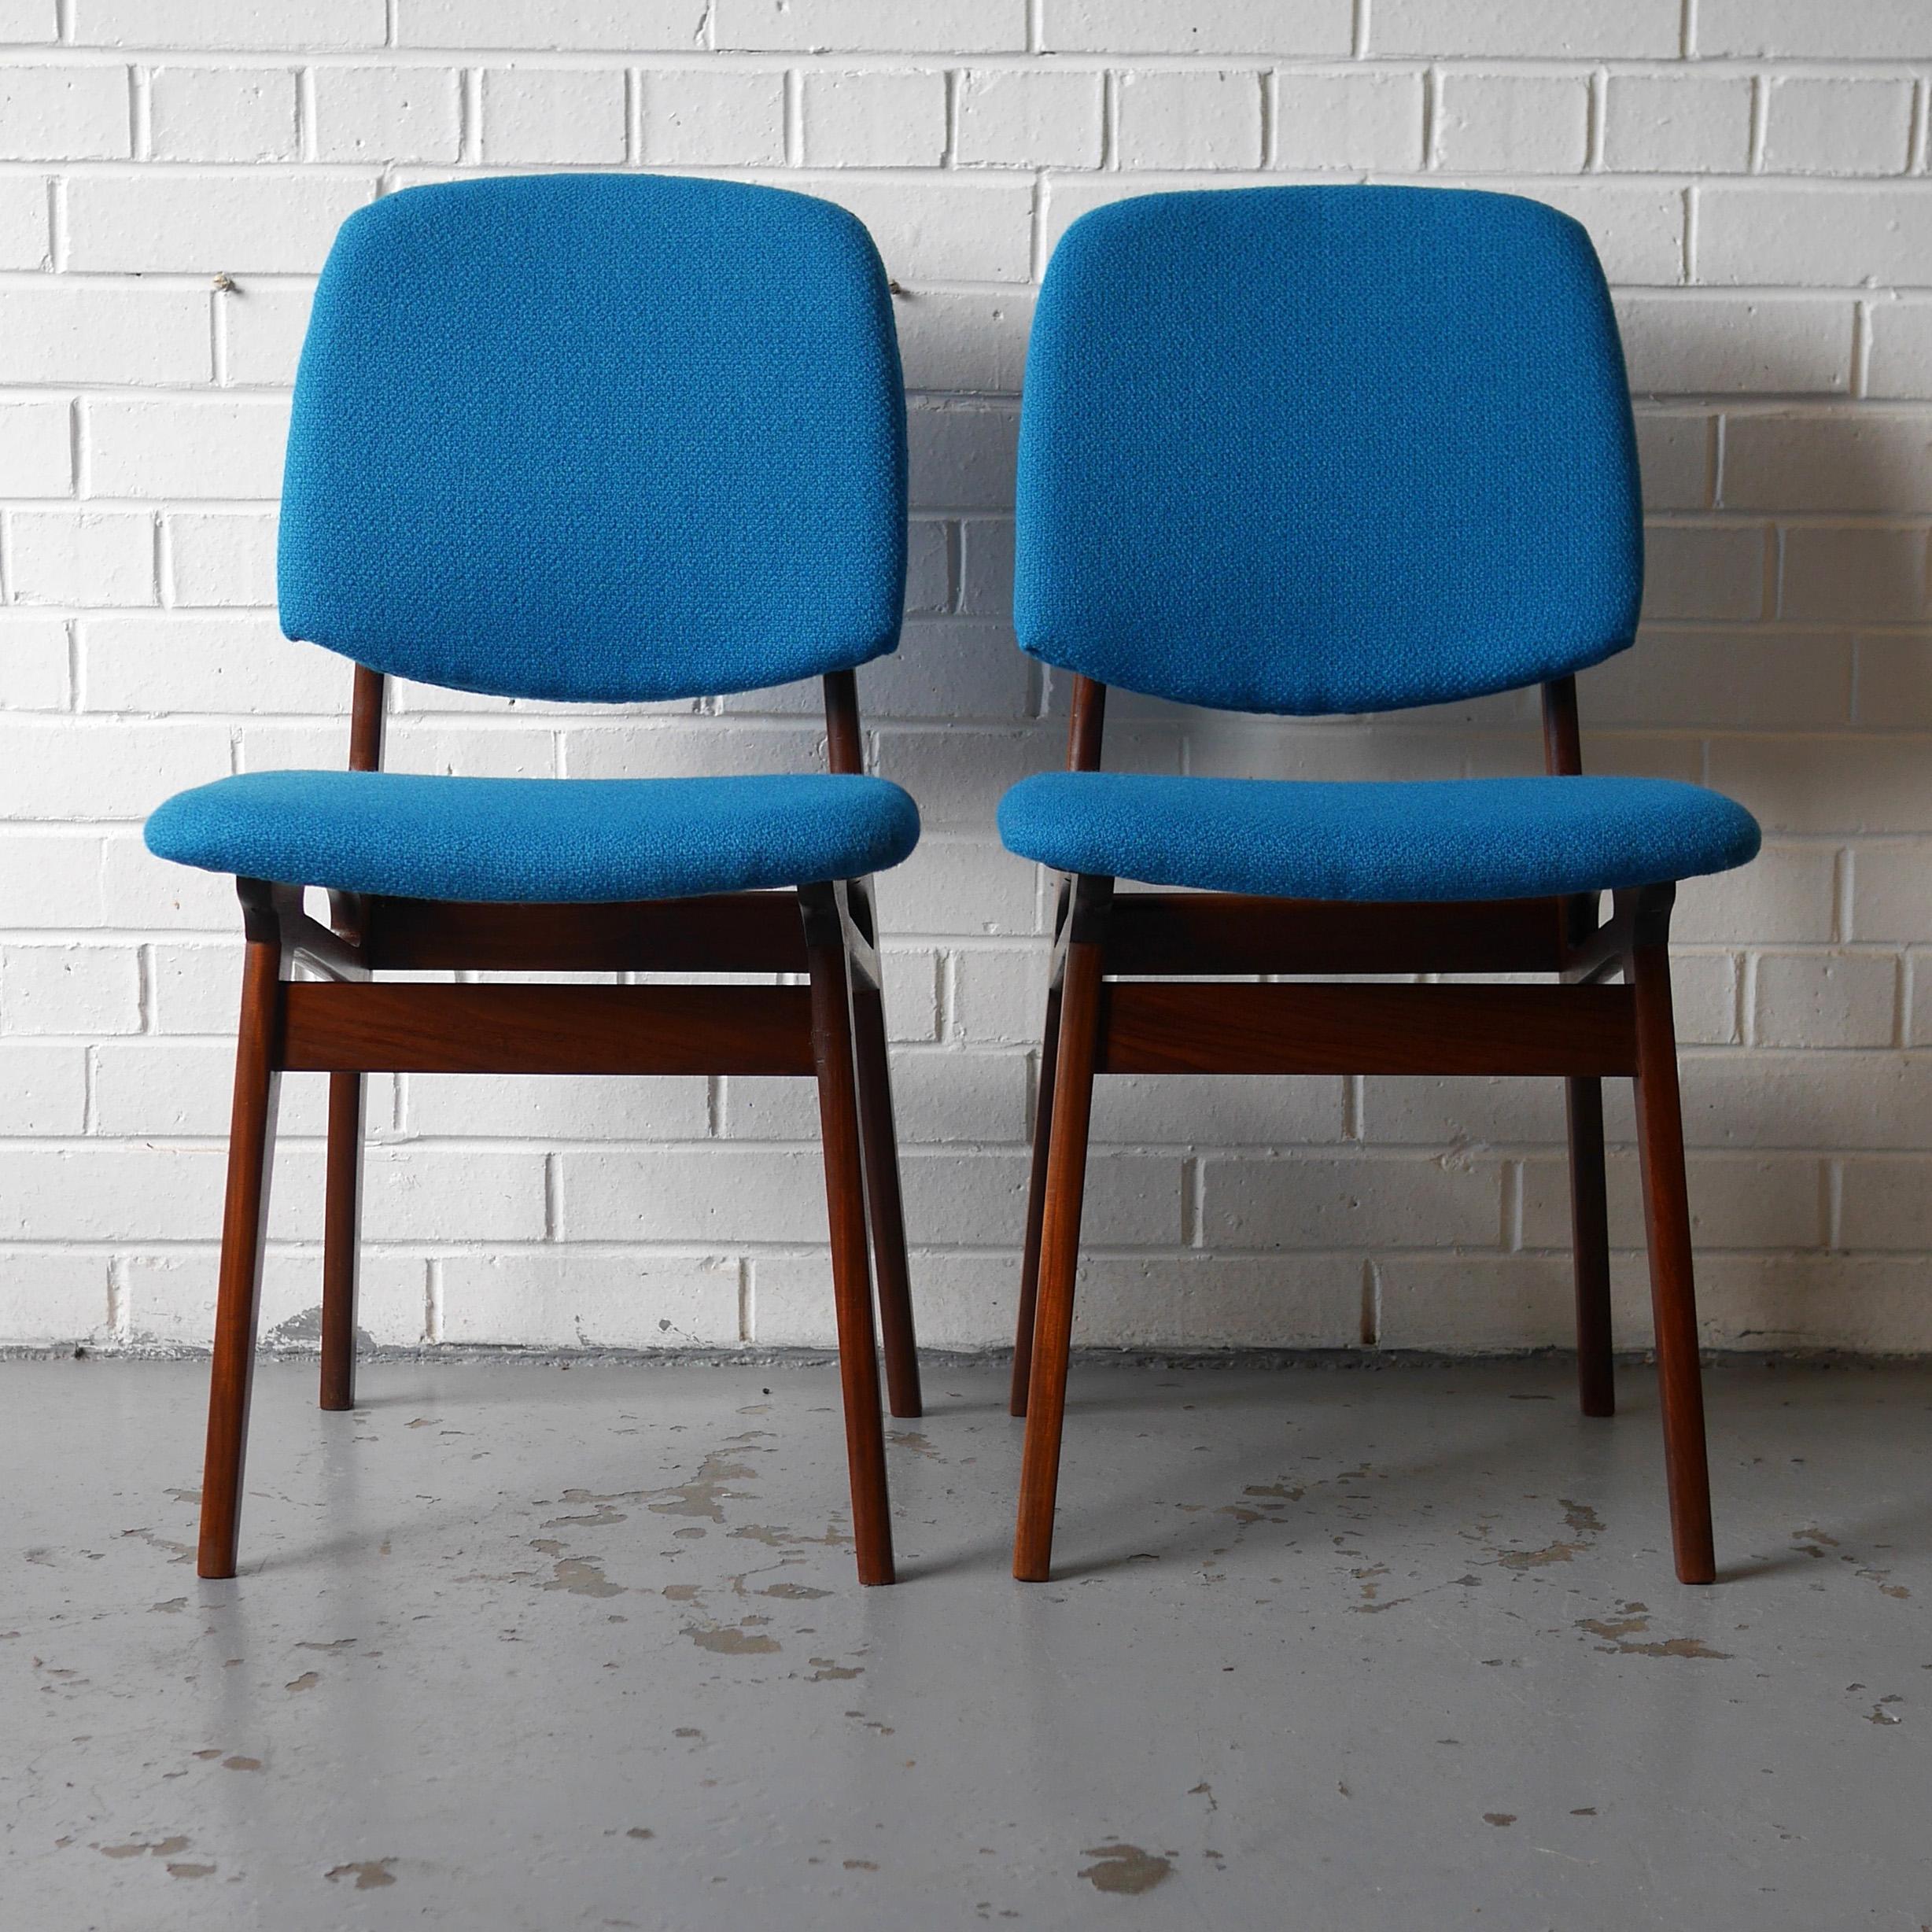 Set of Four Solid Afrormosia Dining Chairs with Blue Wool Upholstery, circa 1961 In Good Condition For Sale In Derby, Derbyshire